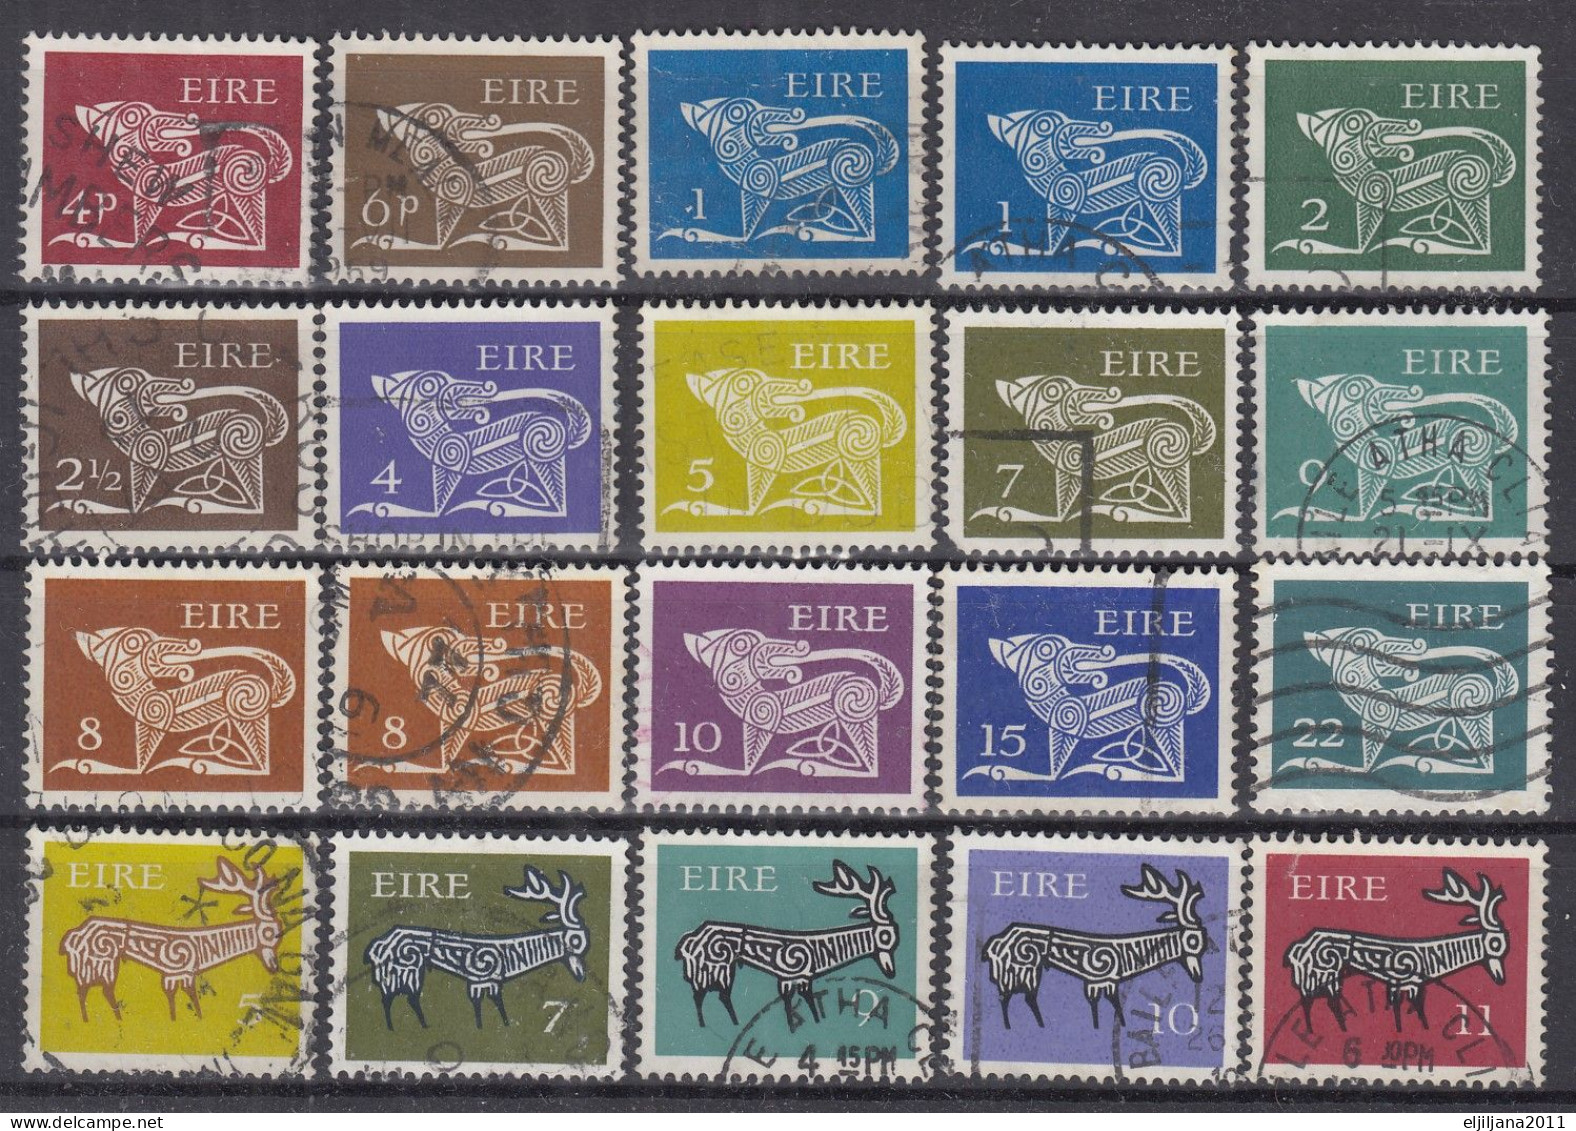 Action !! SALE !! 50 % OFF !! ⁕ IRELAND 1968 - 1981 ÉIRE ⁕ Early Irish Art ⁕ 20v Used - Used Stamps